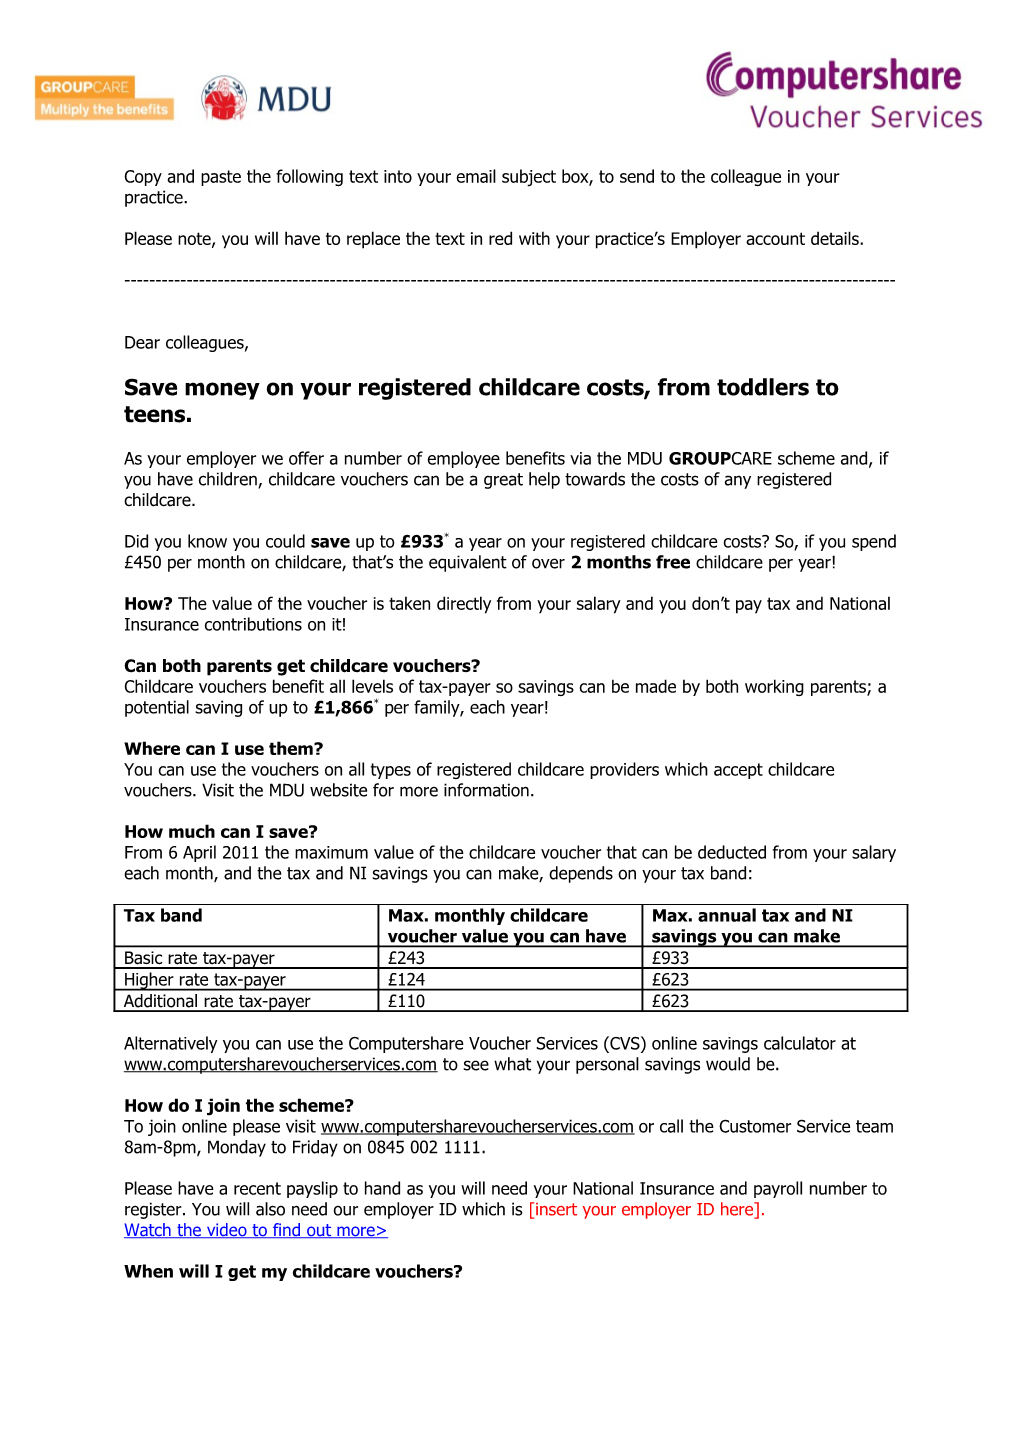 Save Money on Your Registered Childcare Costs, from Toddlers to Teens